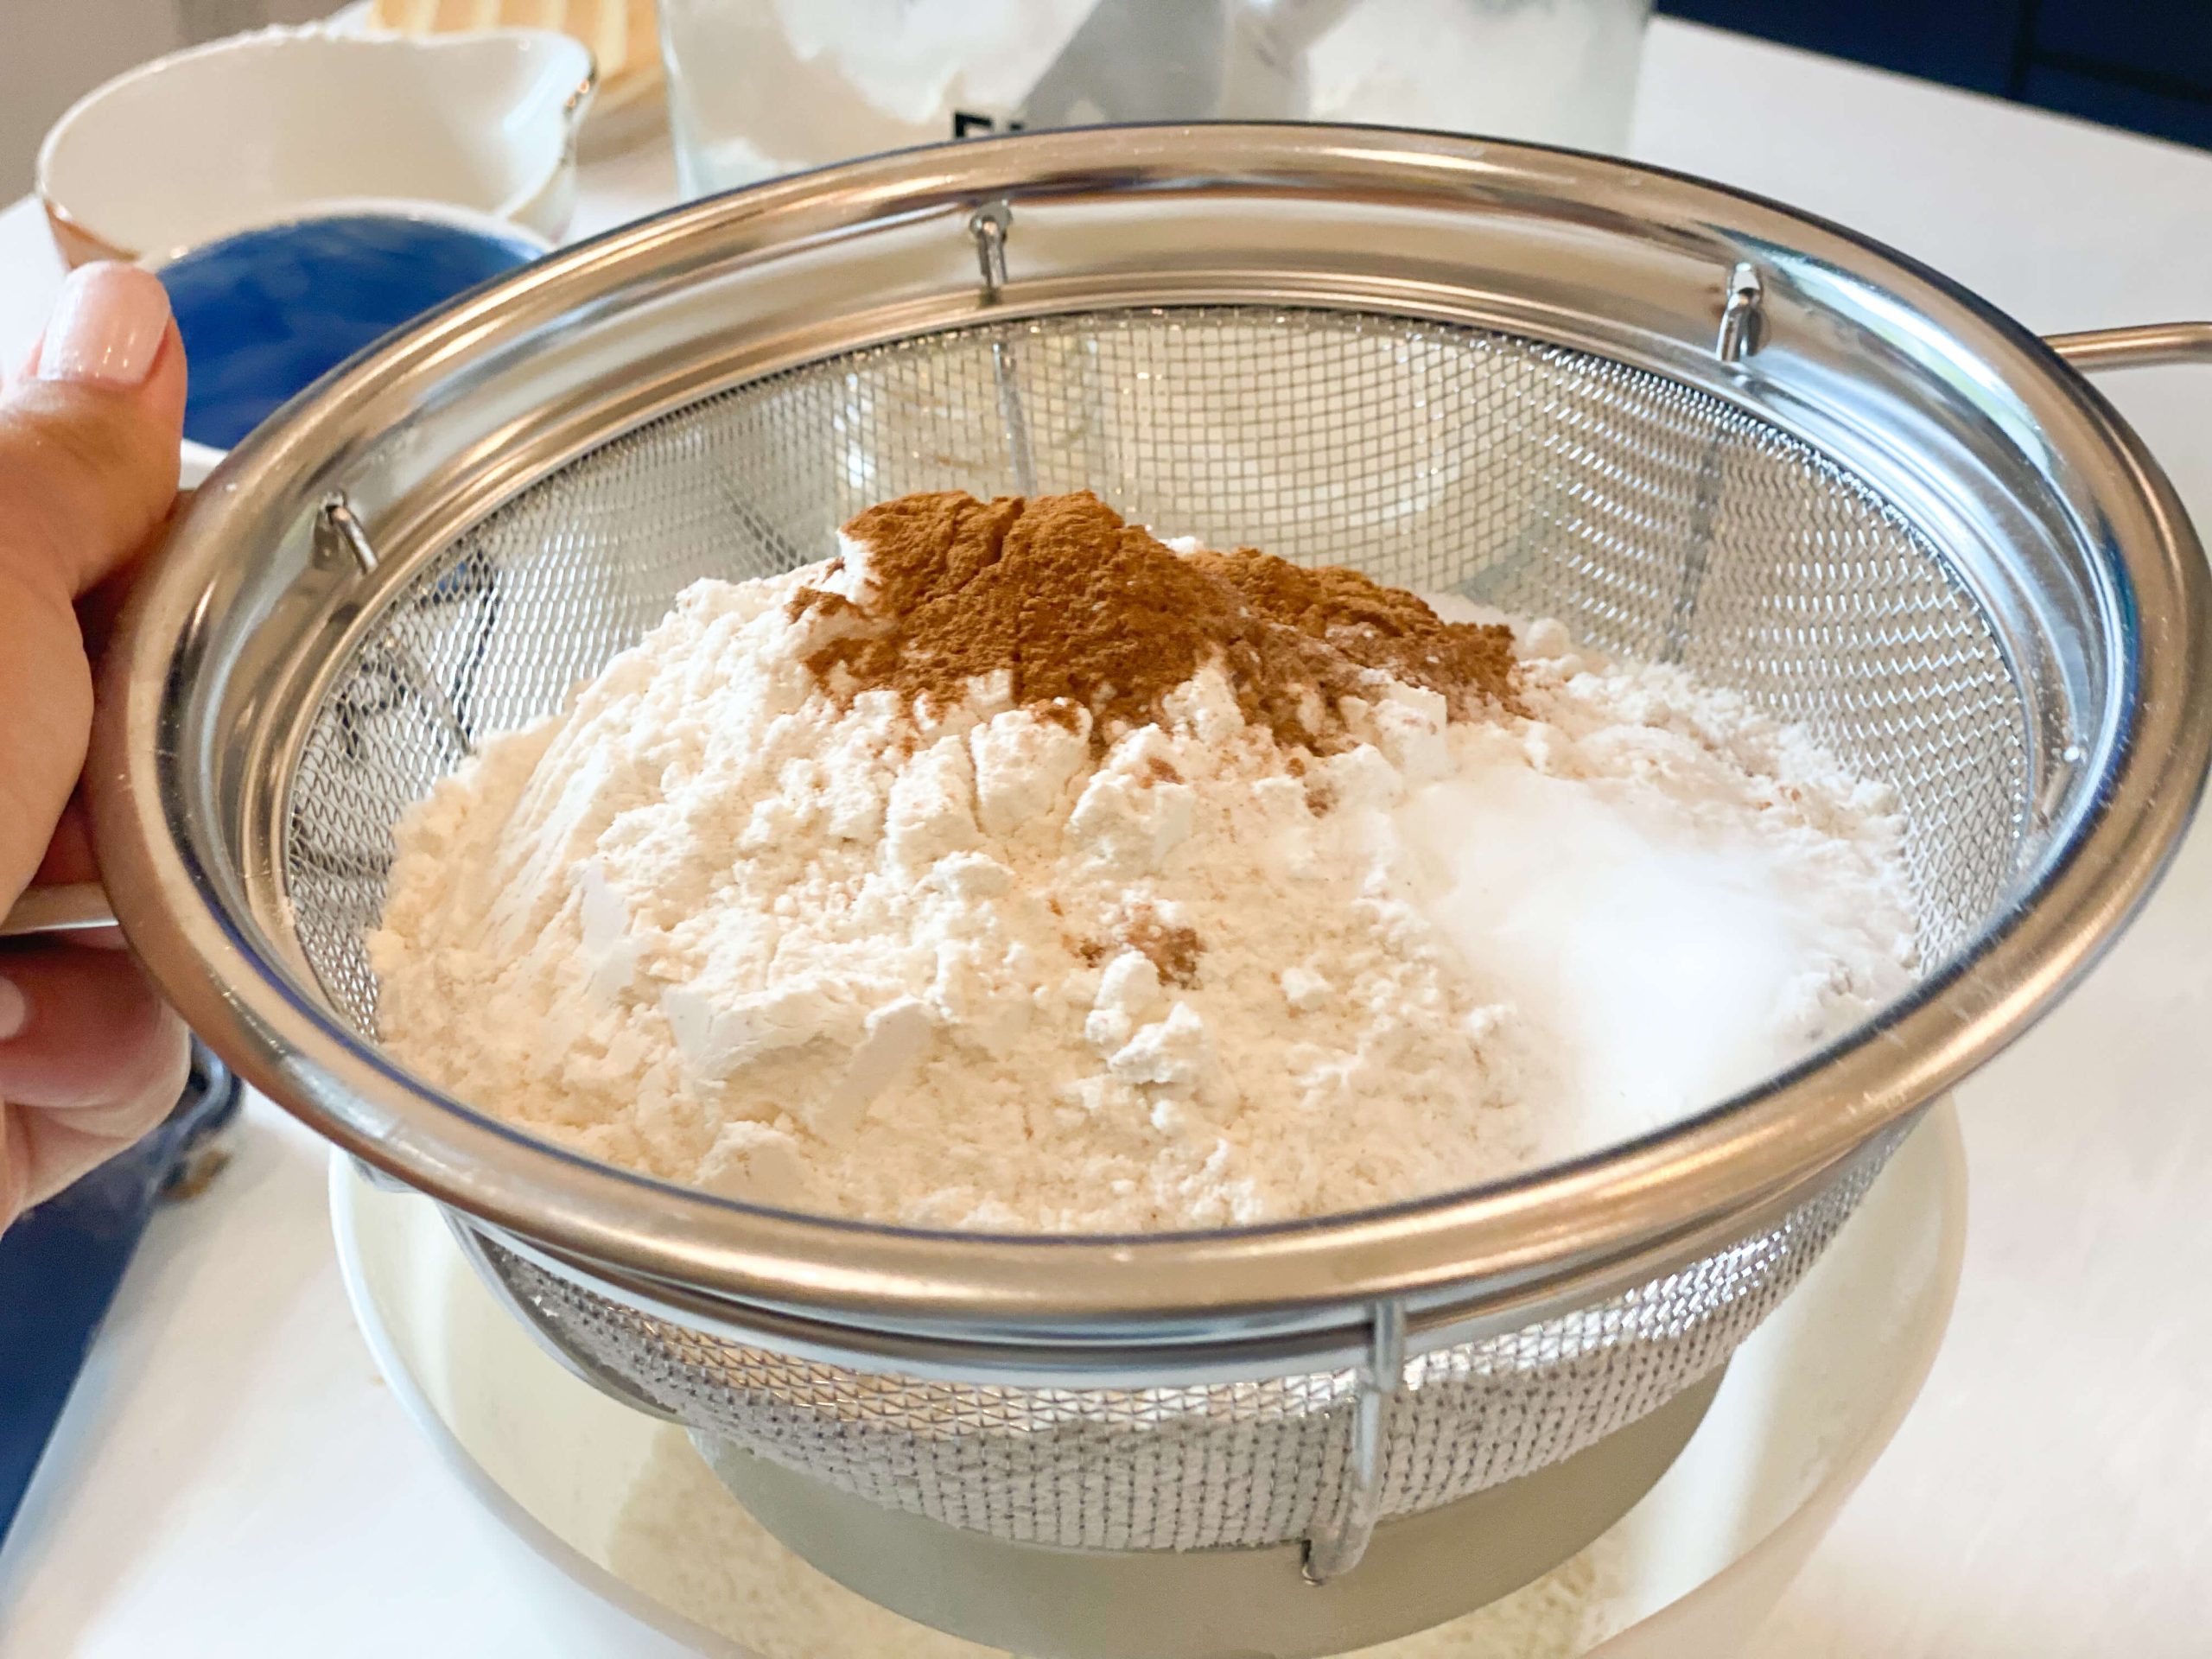 dry ingredients sifted